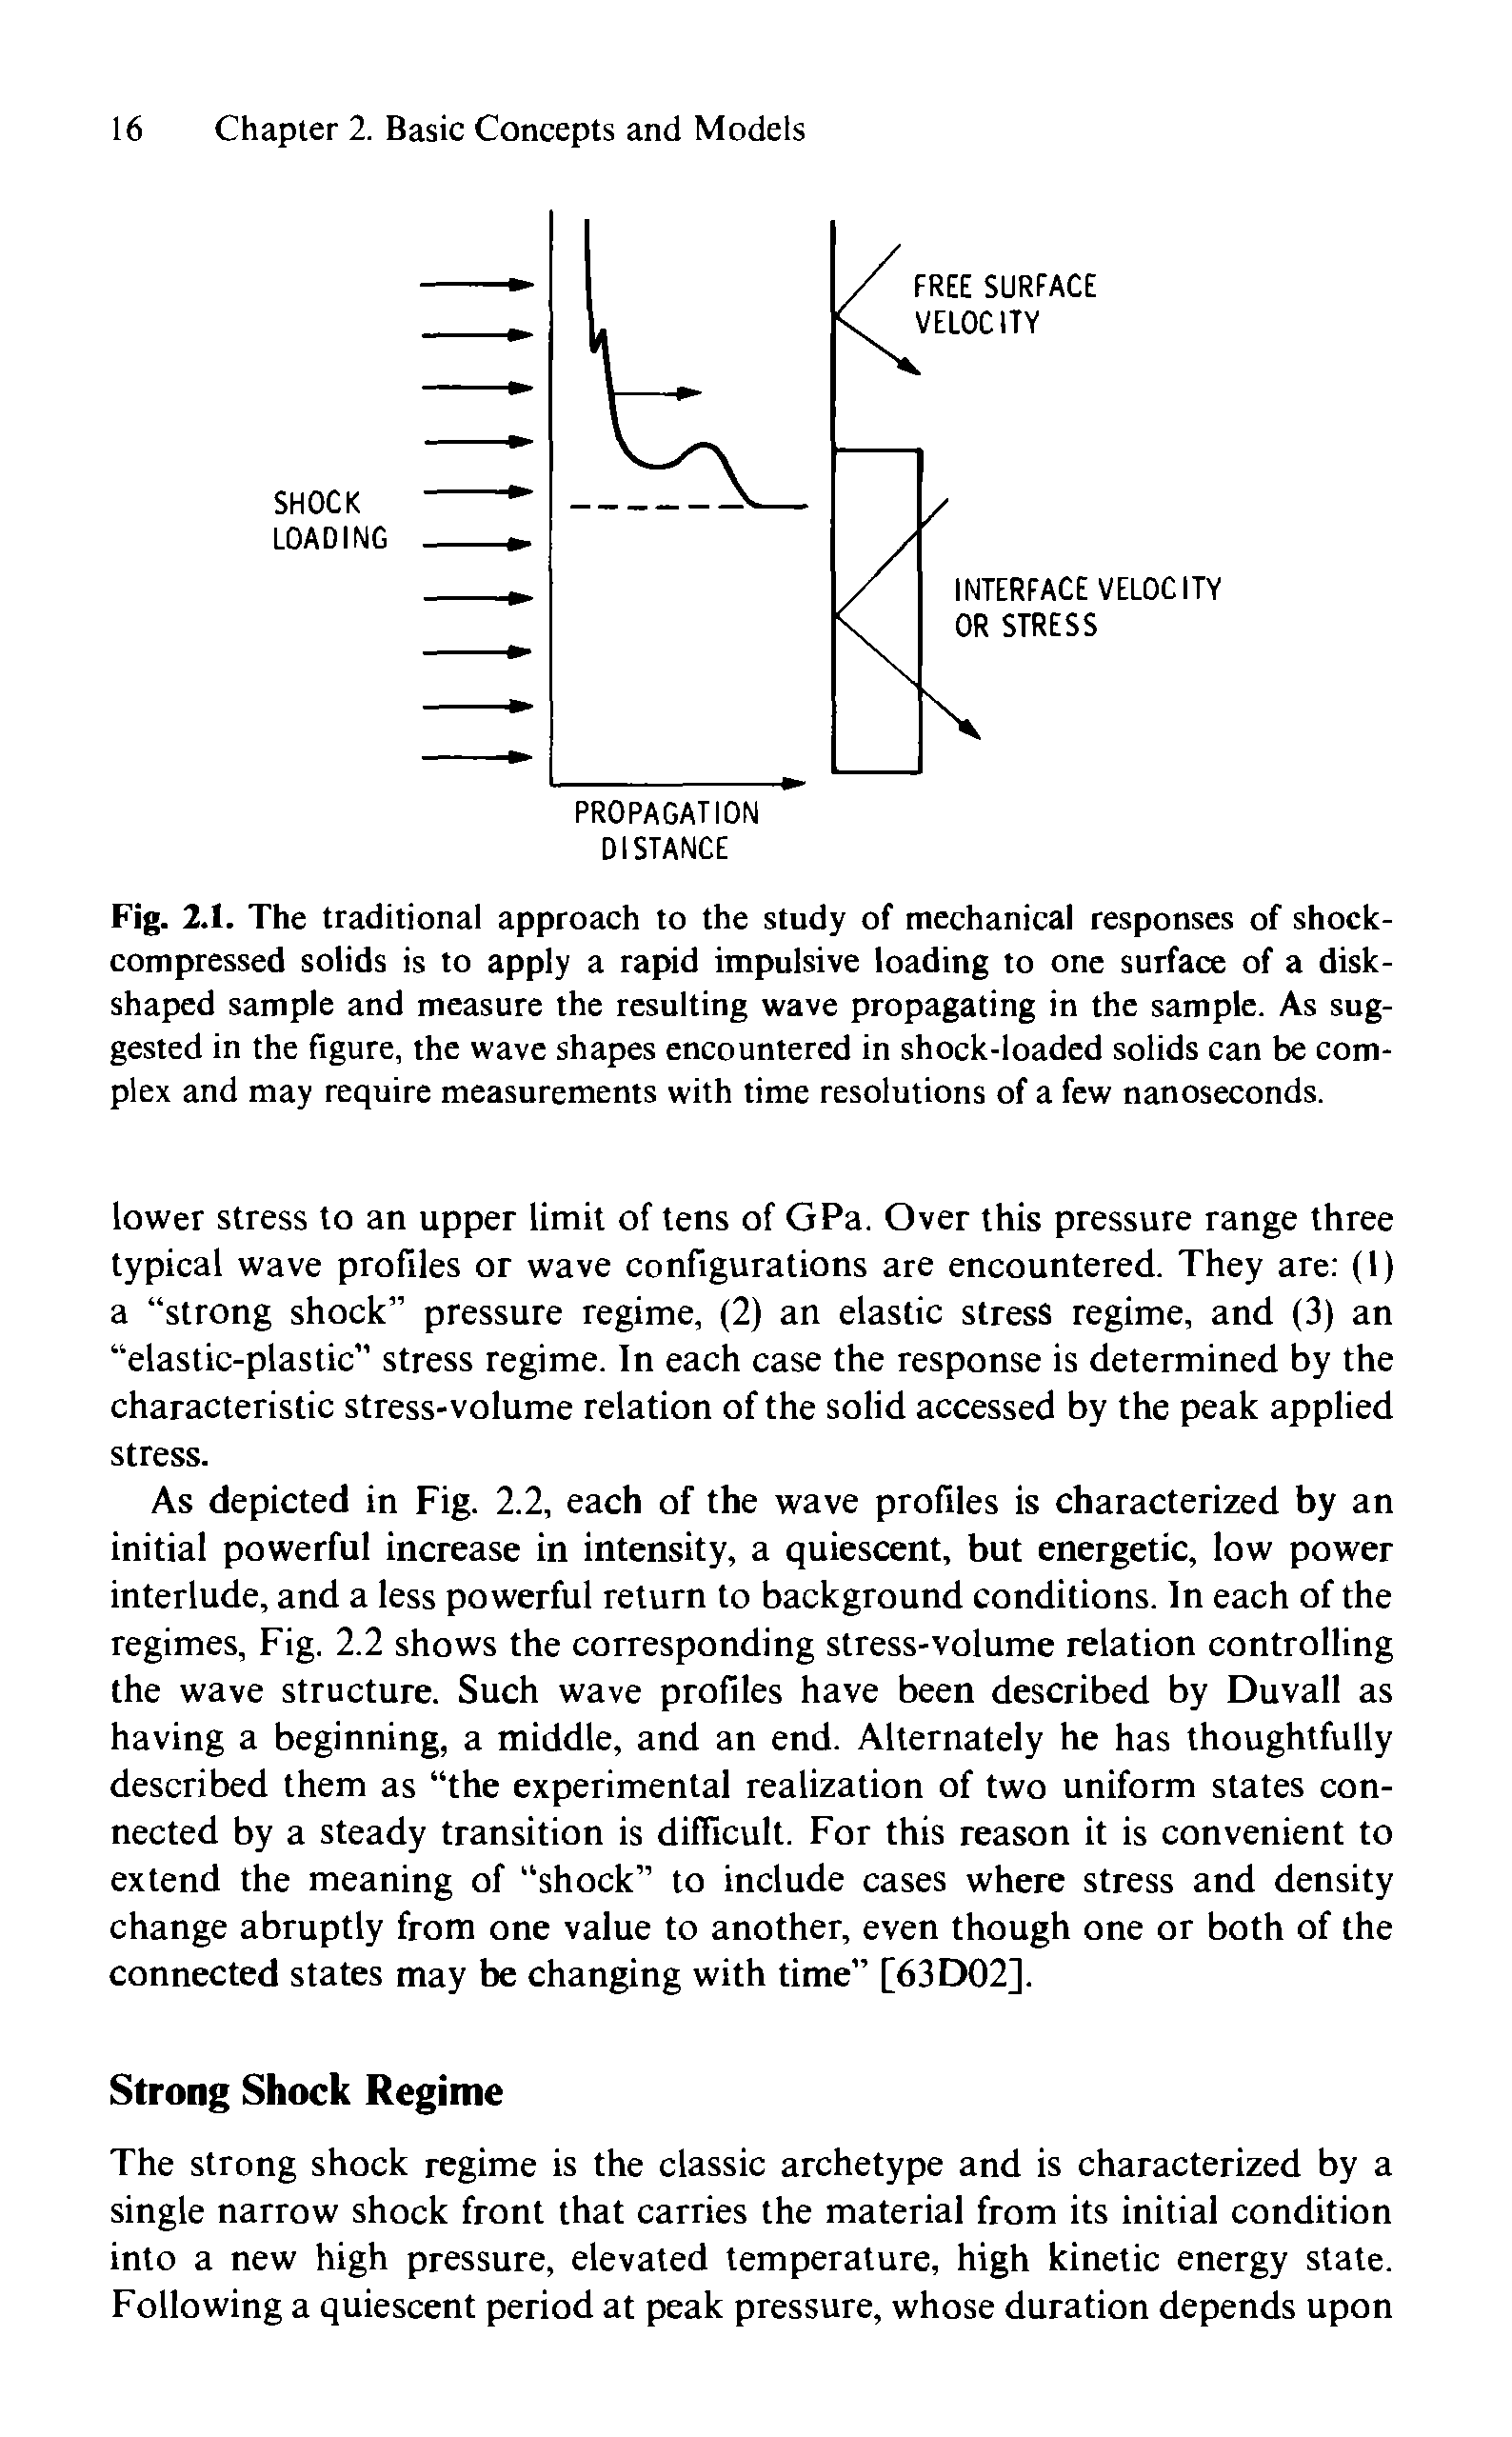 Fig. 2.1. The traditional approach to the study of mechanical responses of shock-compressed solids is to apply a rapid impulsive loading to one surface of a diskshaped sample and measure the resulting wave propagating in the sample. As suggested in the figure, the wave shapes encountered in shock-loaded solids can be complex and may require measurements with time resolutions of a few nanoseconds.